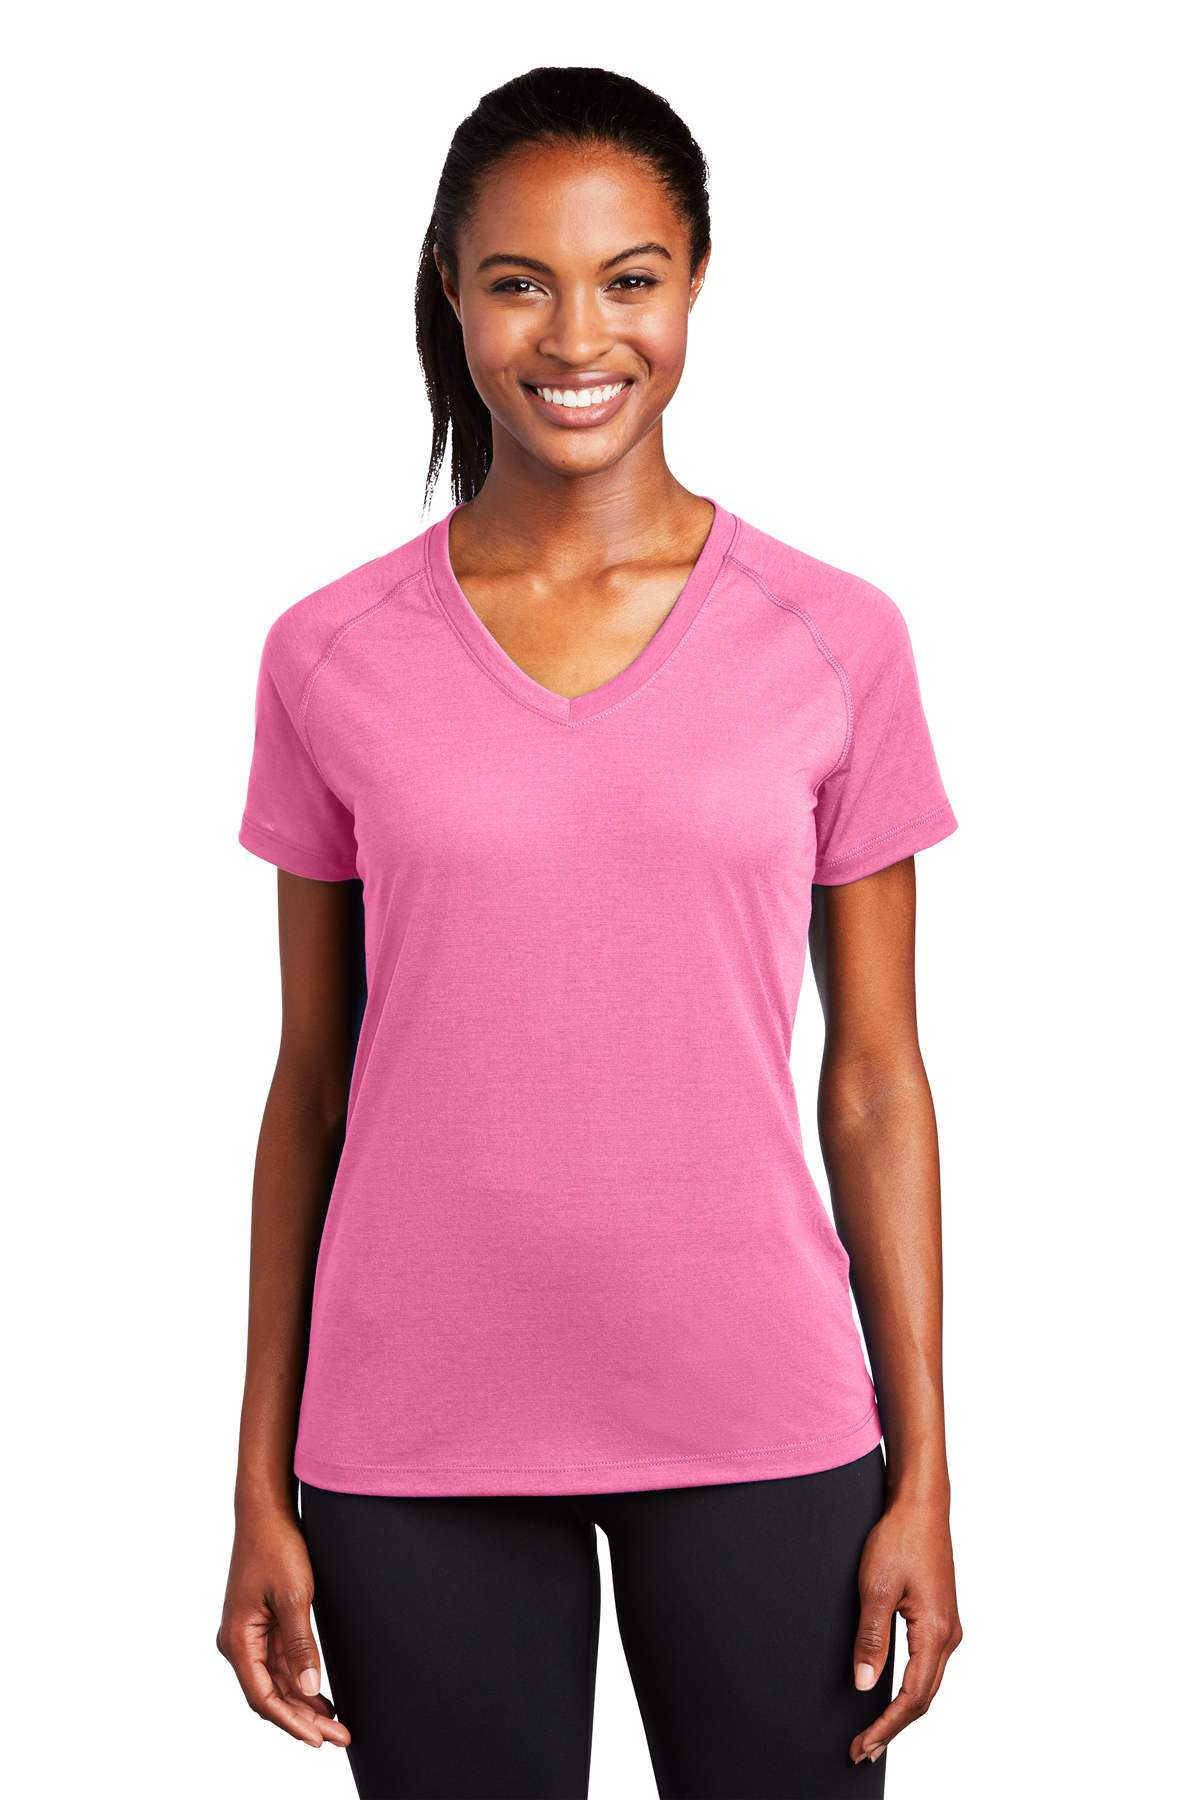 Marika tek Women's Dry-Wik Performance Wear Bright Pink Athletic T-Shirt  Size S - $12 - From The Thrifty